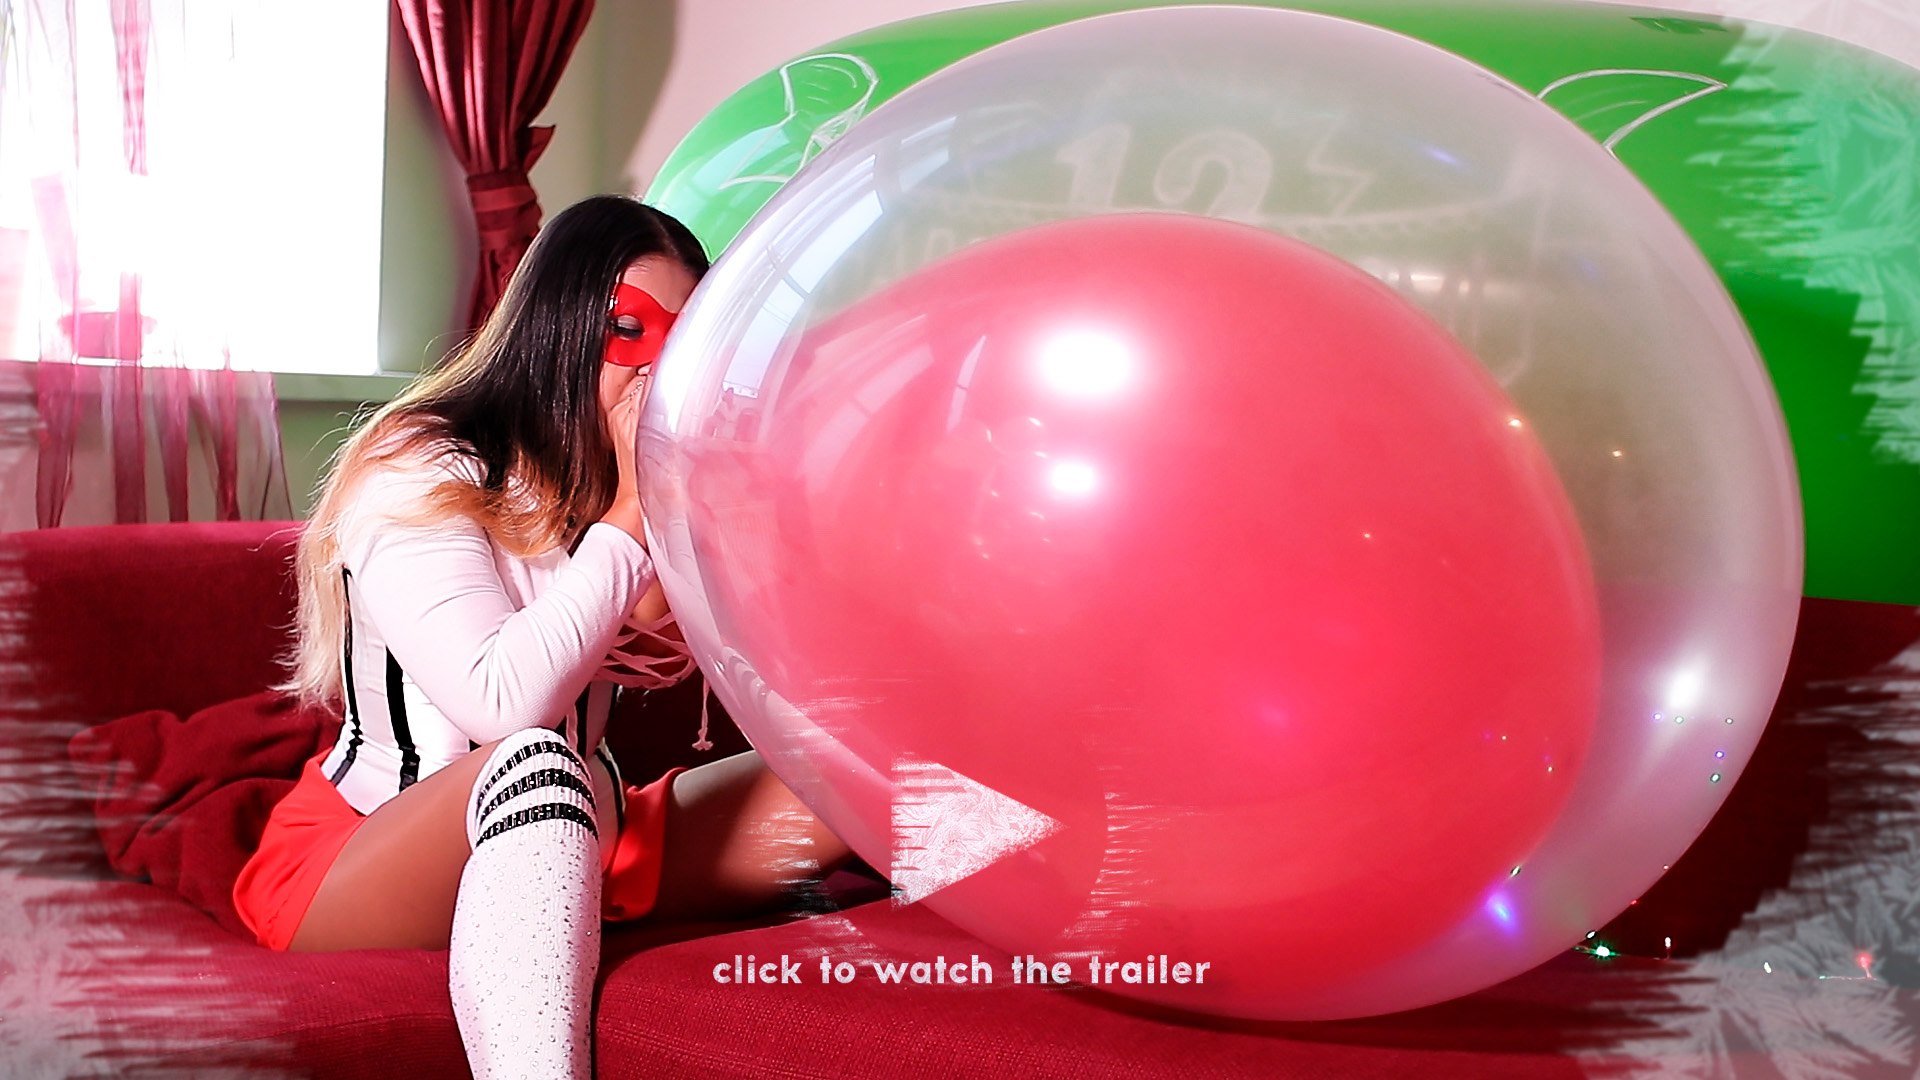 Hot Indian Girl Sit To Pop Balloon In Sofa